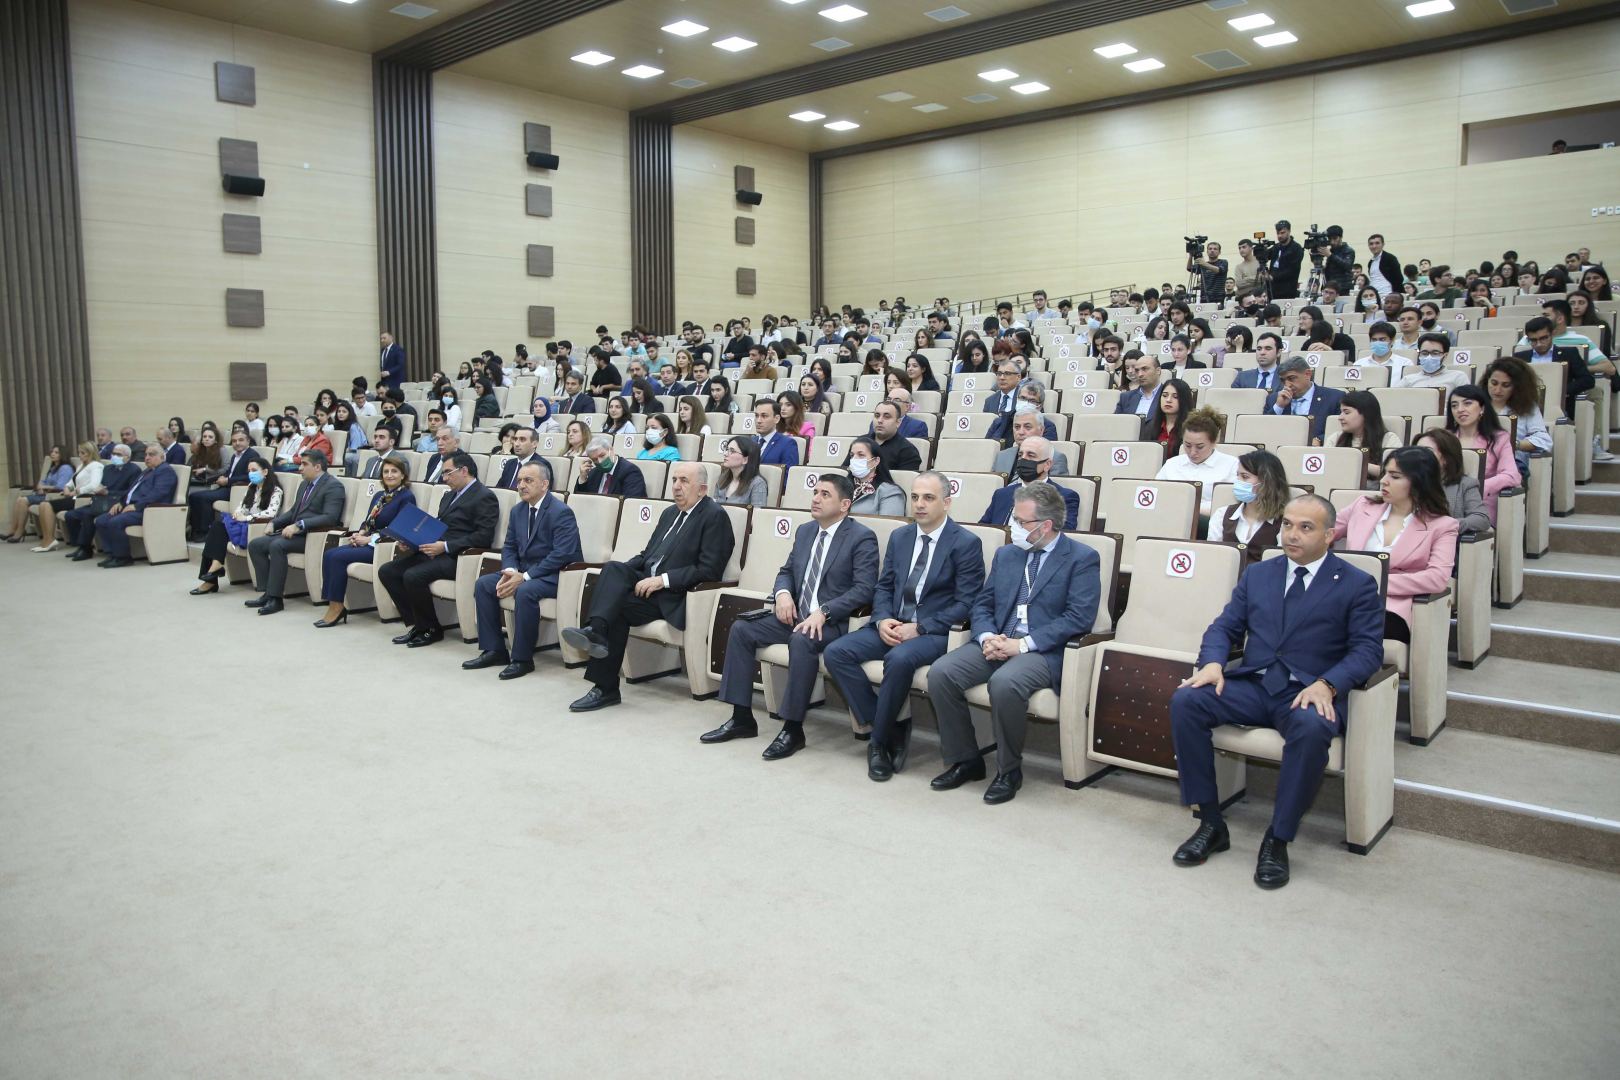 Baku Higher Oil School hosts opening ceremony of Third International Student Research and Science Conferences (PHOTO)